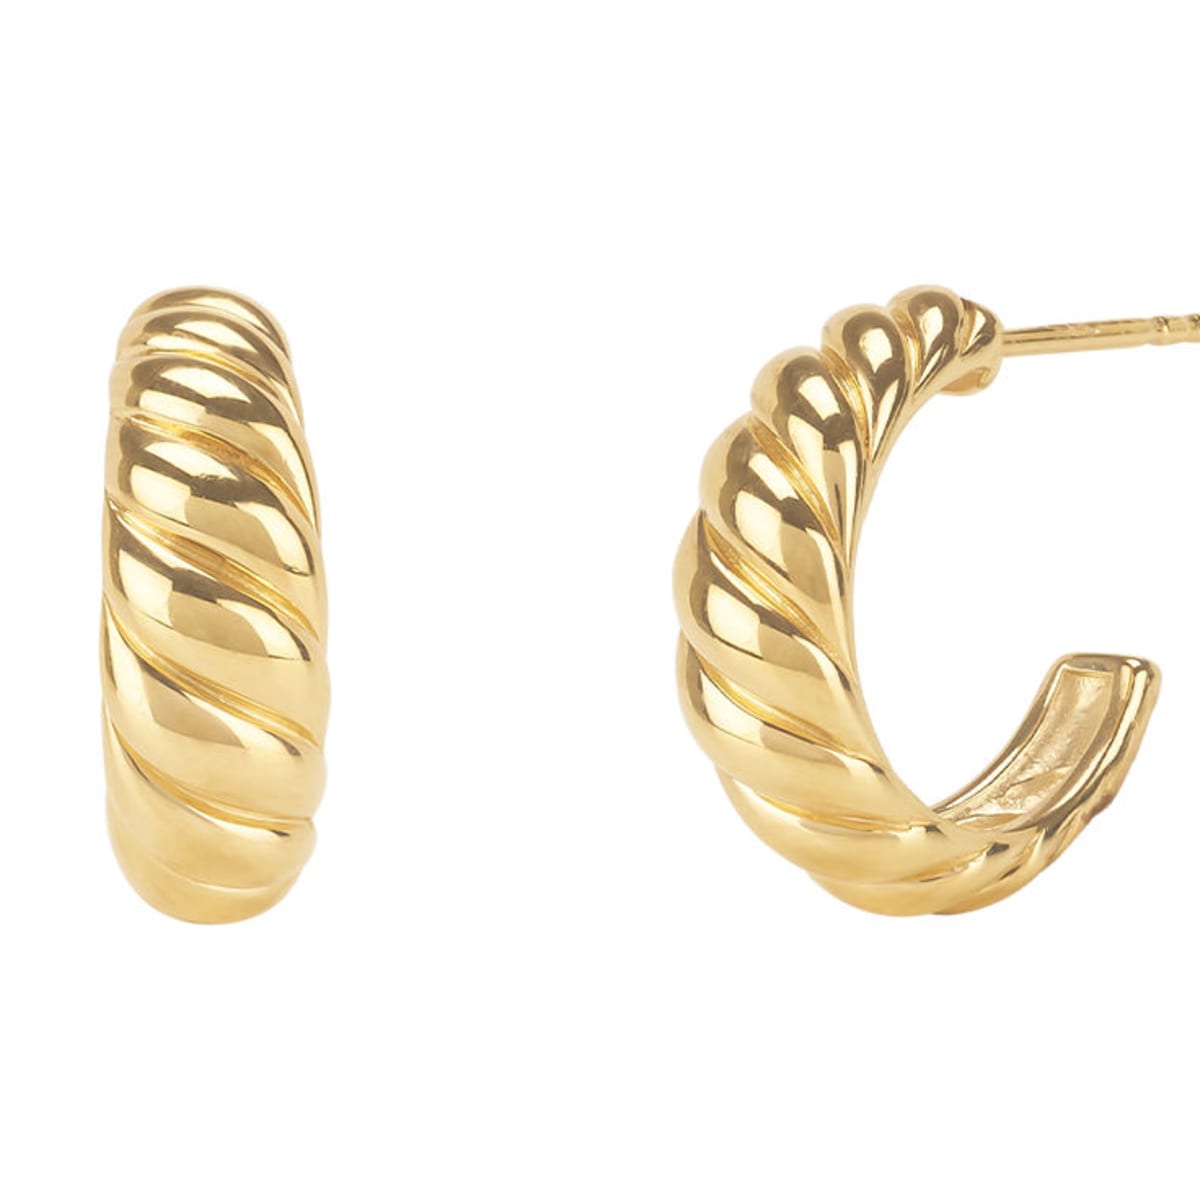 Best gold hoop earrings 2022: From Mejuri's braided style to Missoma's  chunky design